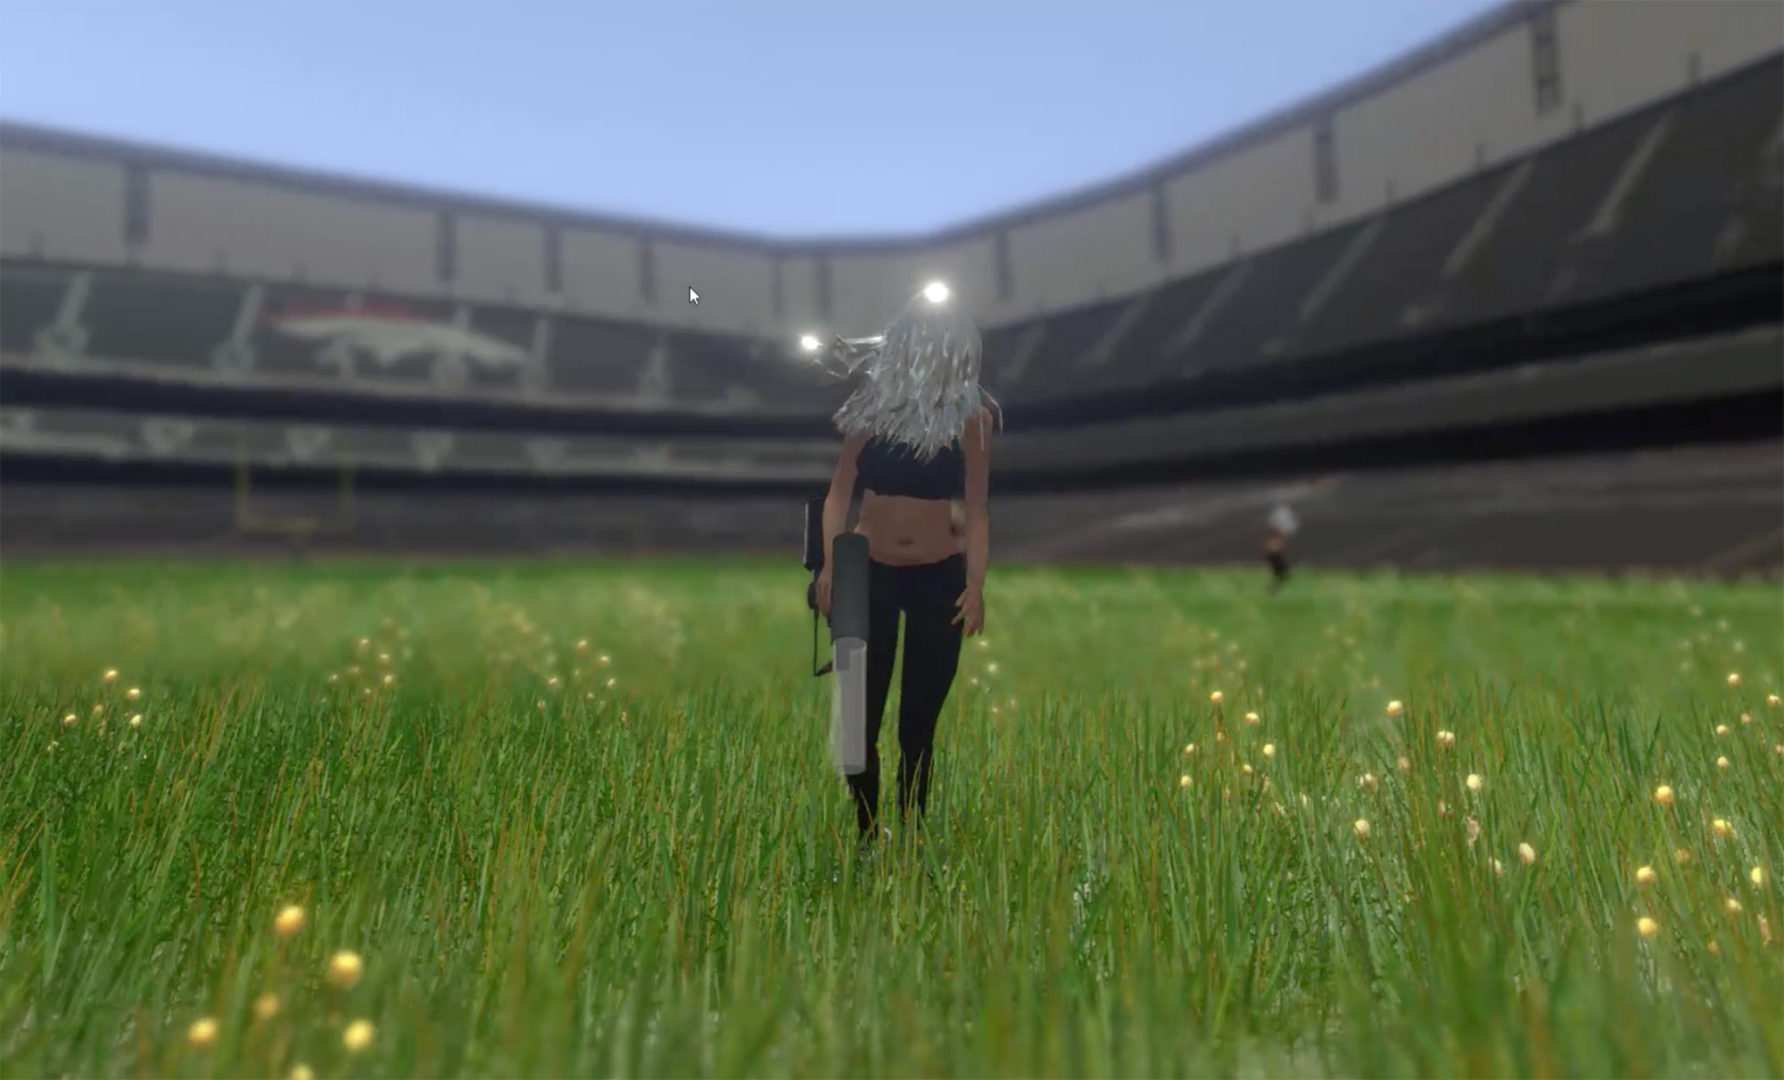 Screen capture of software performance RARA by Kristin McWharter. A Cheerleader avatar stands in an abandoned and overgrown football field.